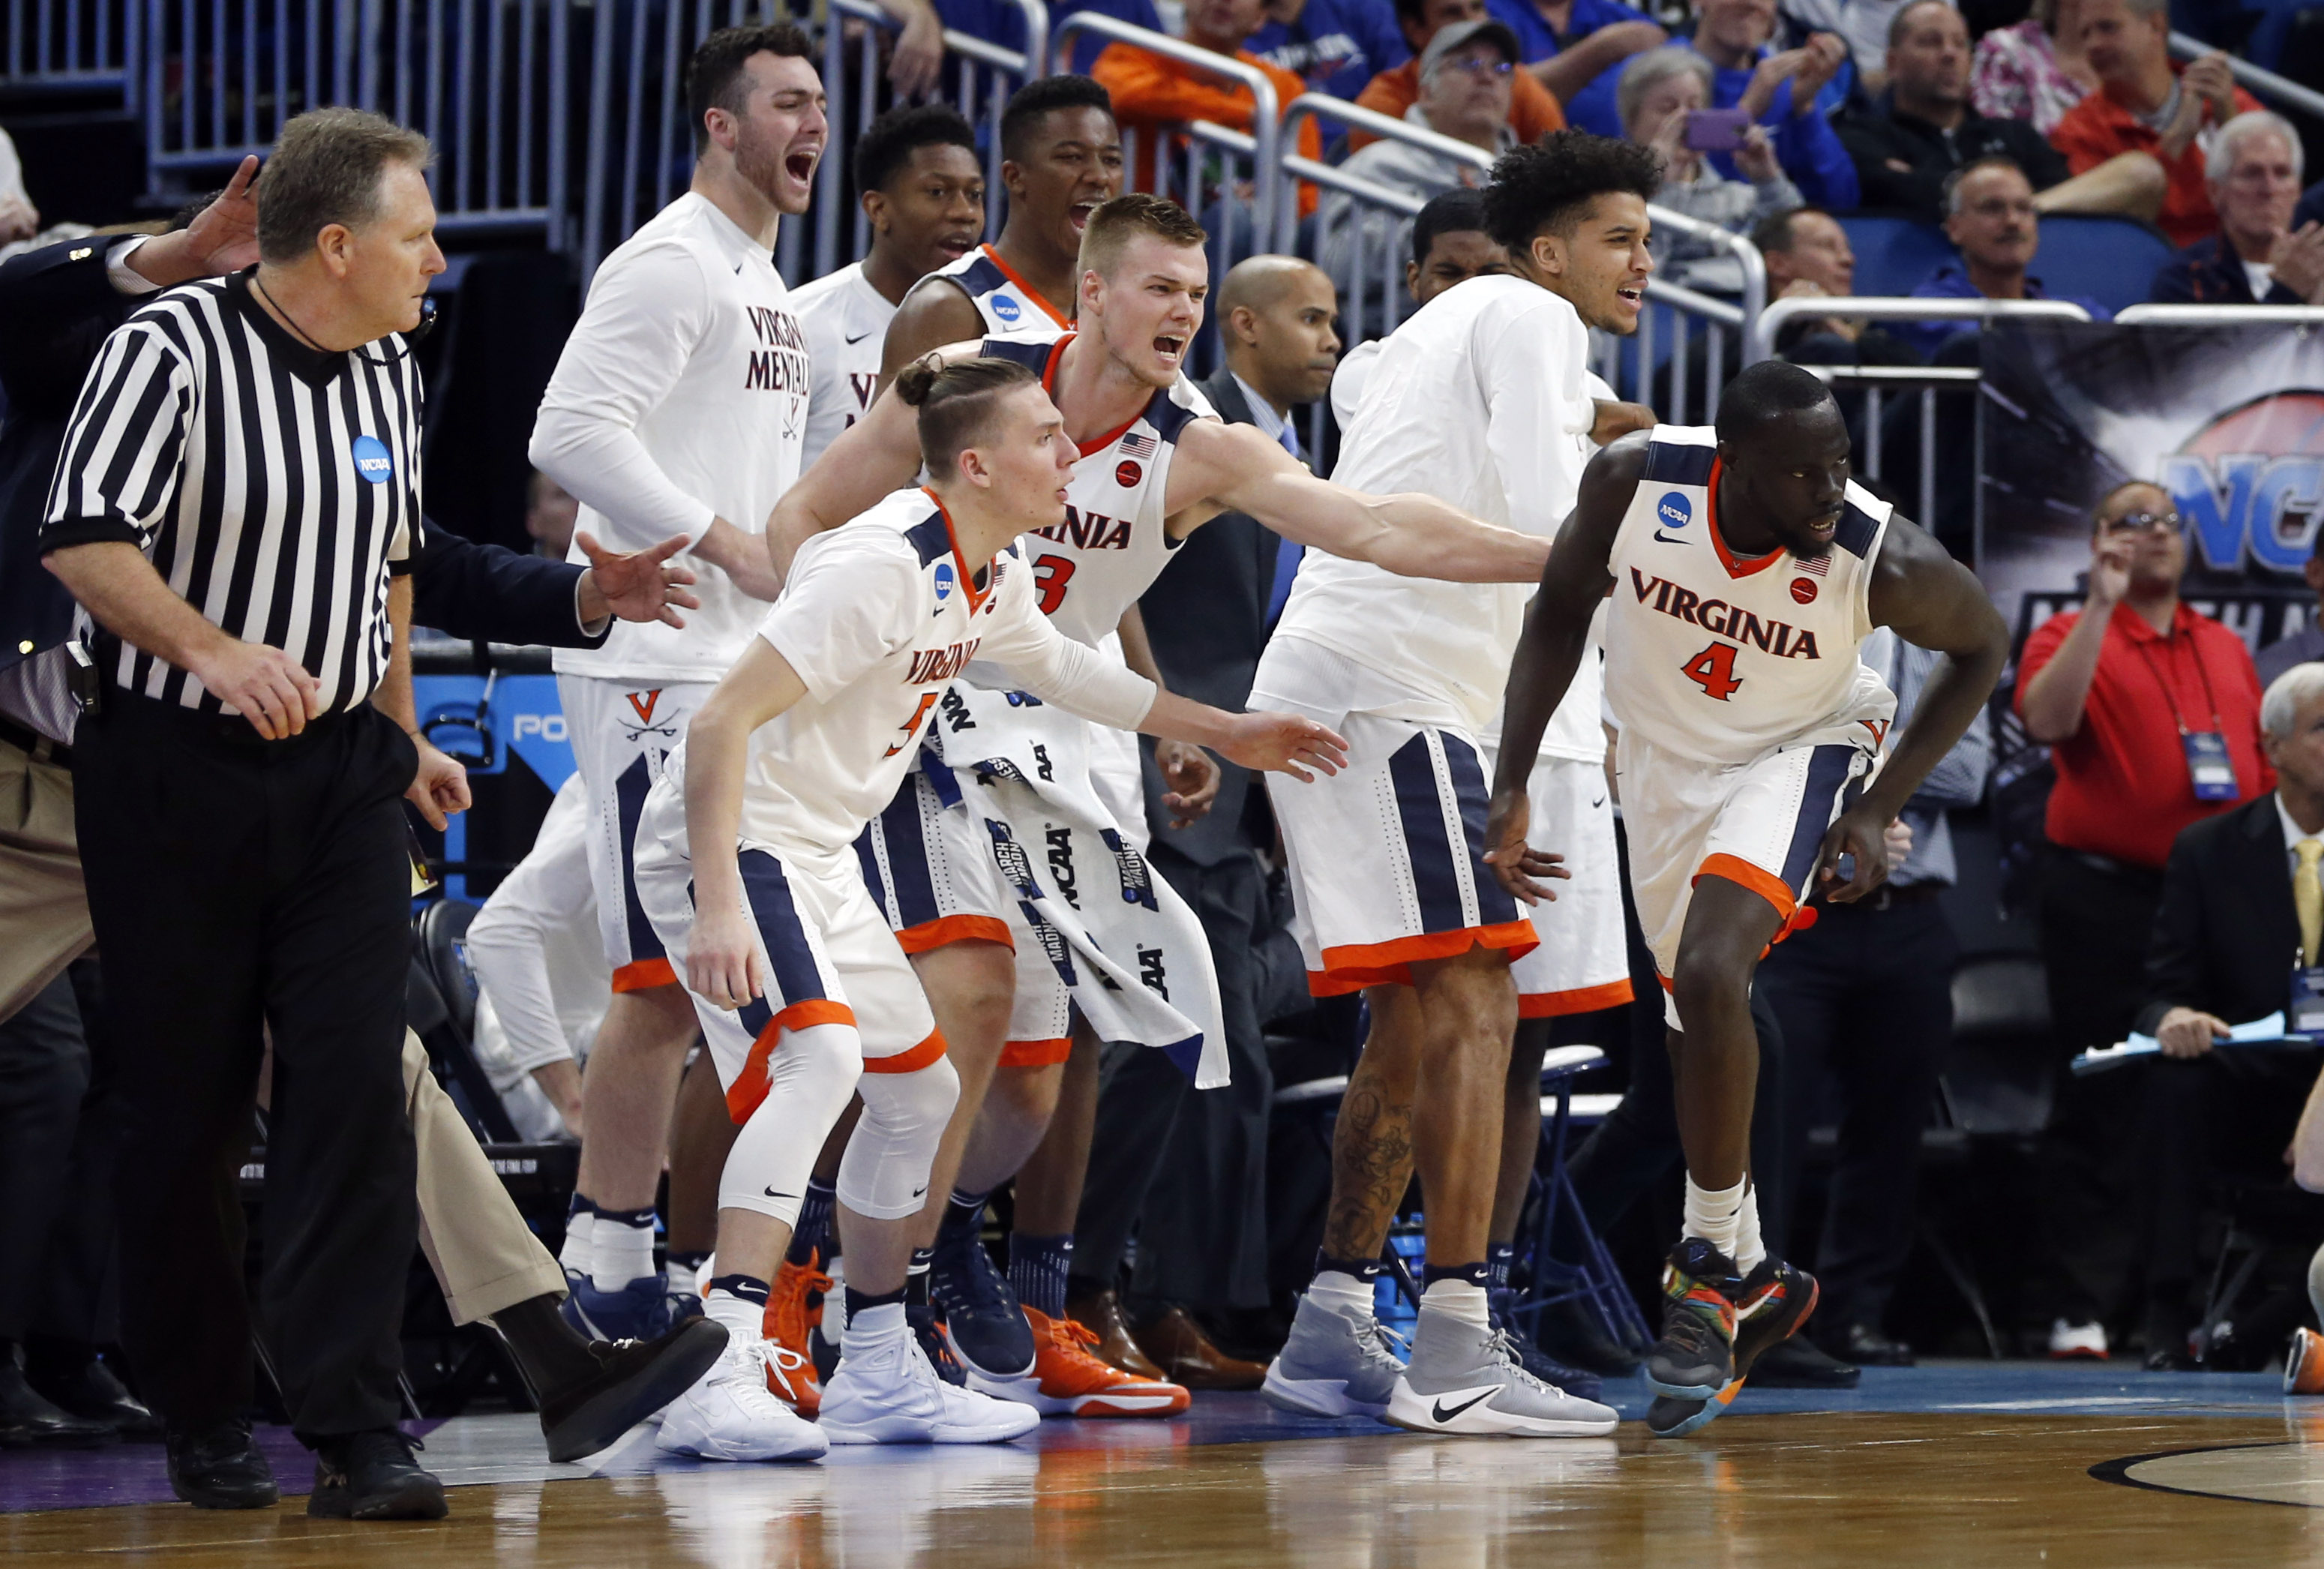 March Madness: How To Watch Virginia Cavaliers vs Florida Gators